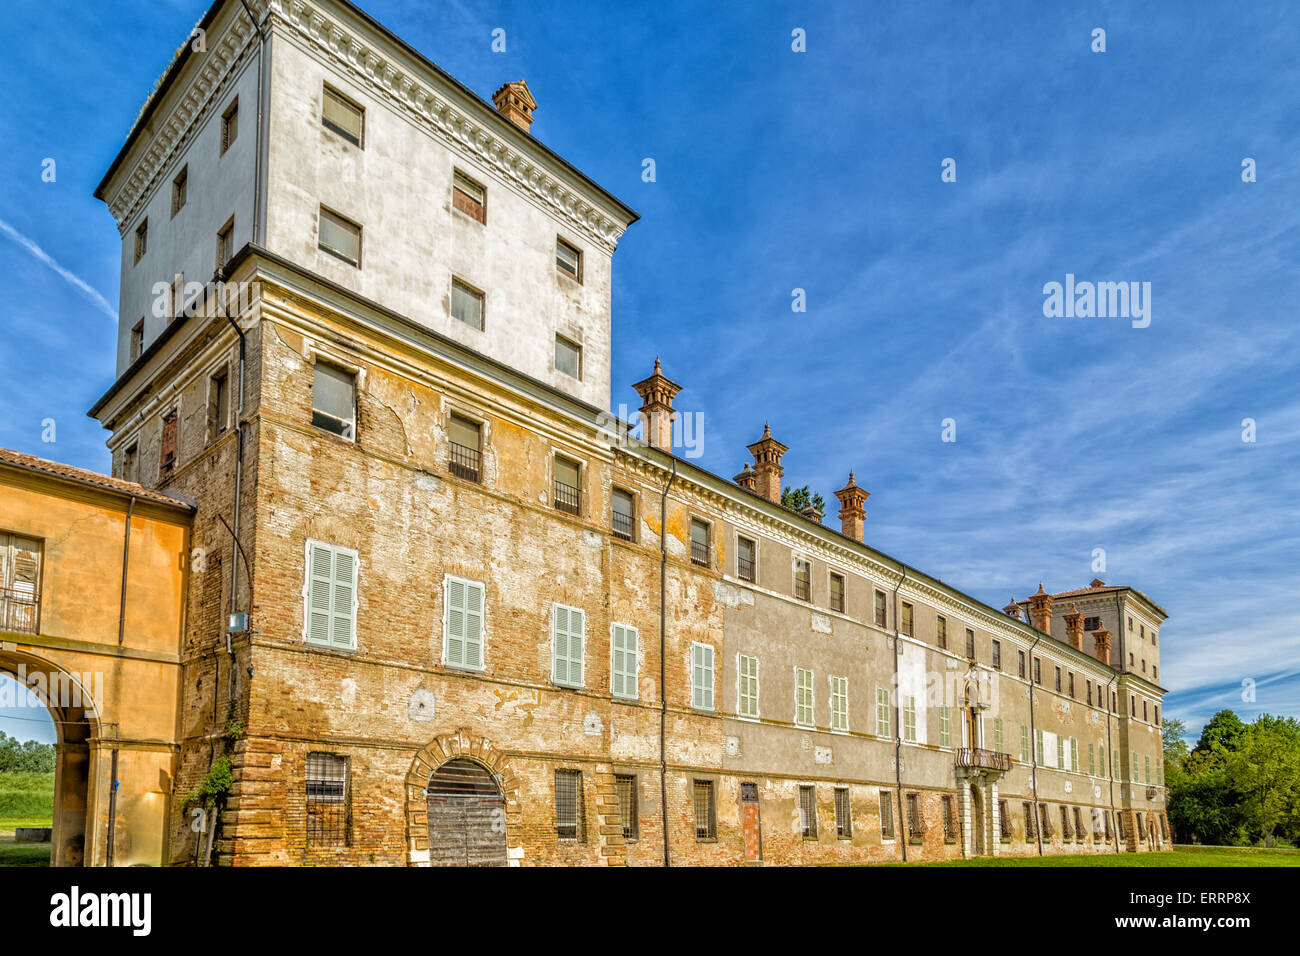 Historic feelings in the old architecture of an Italian XVI century ruined palace, Palazzo San Giacomo in Russi, village near Ravenna in Northern Italy: Stock Photo